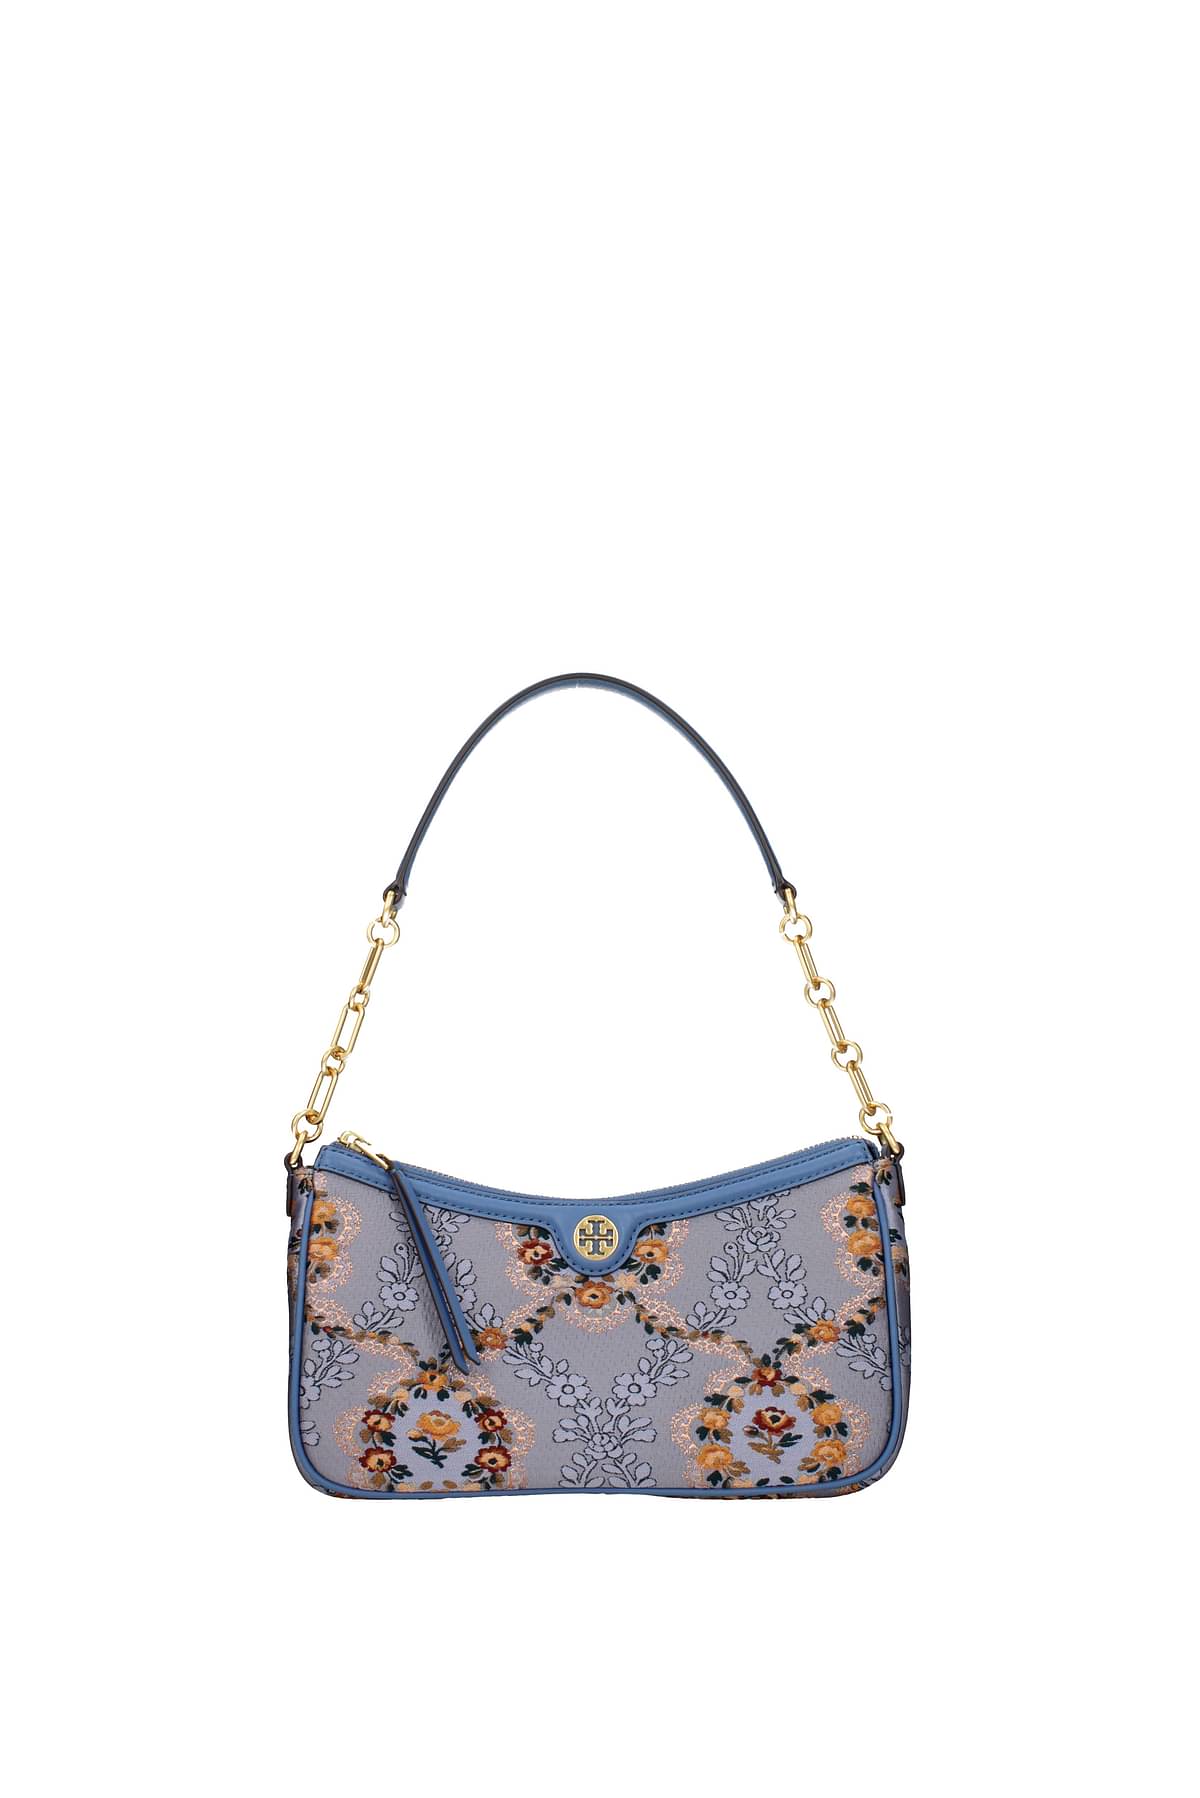 Tory Burch Shoulder bags Women 86604480 Leather Blue Chambray 259,88€